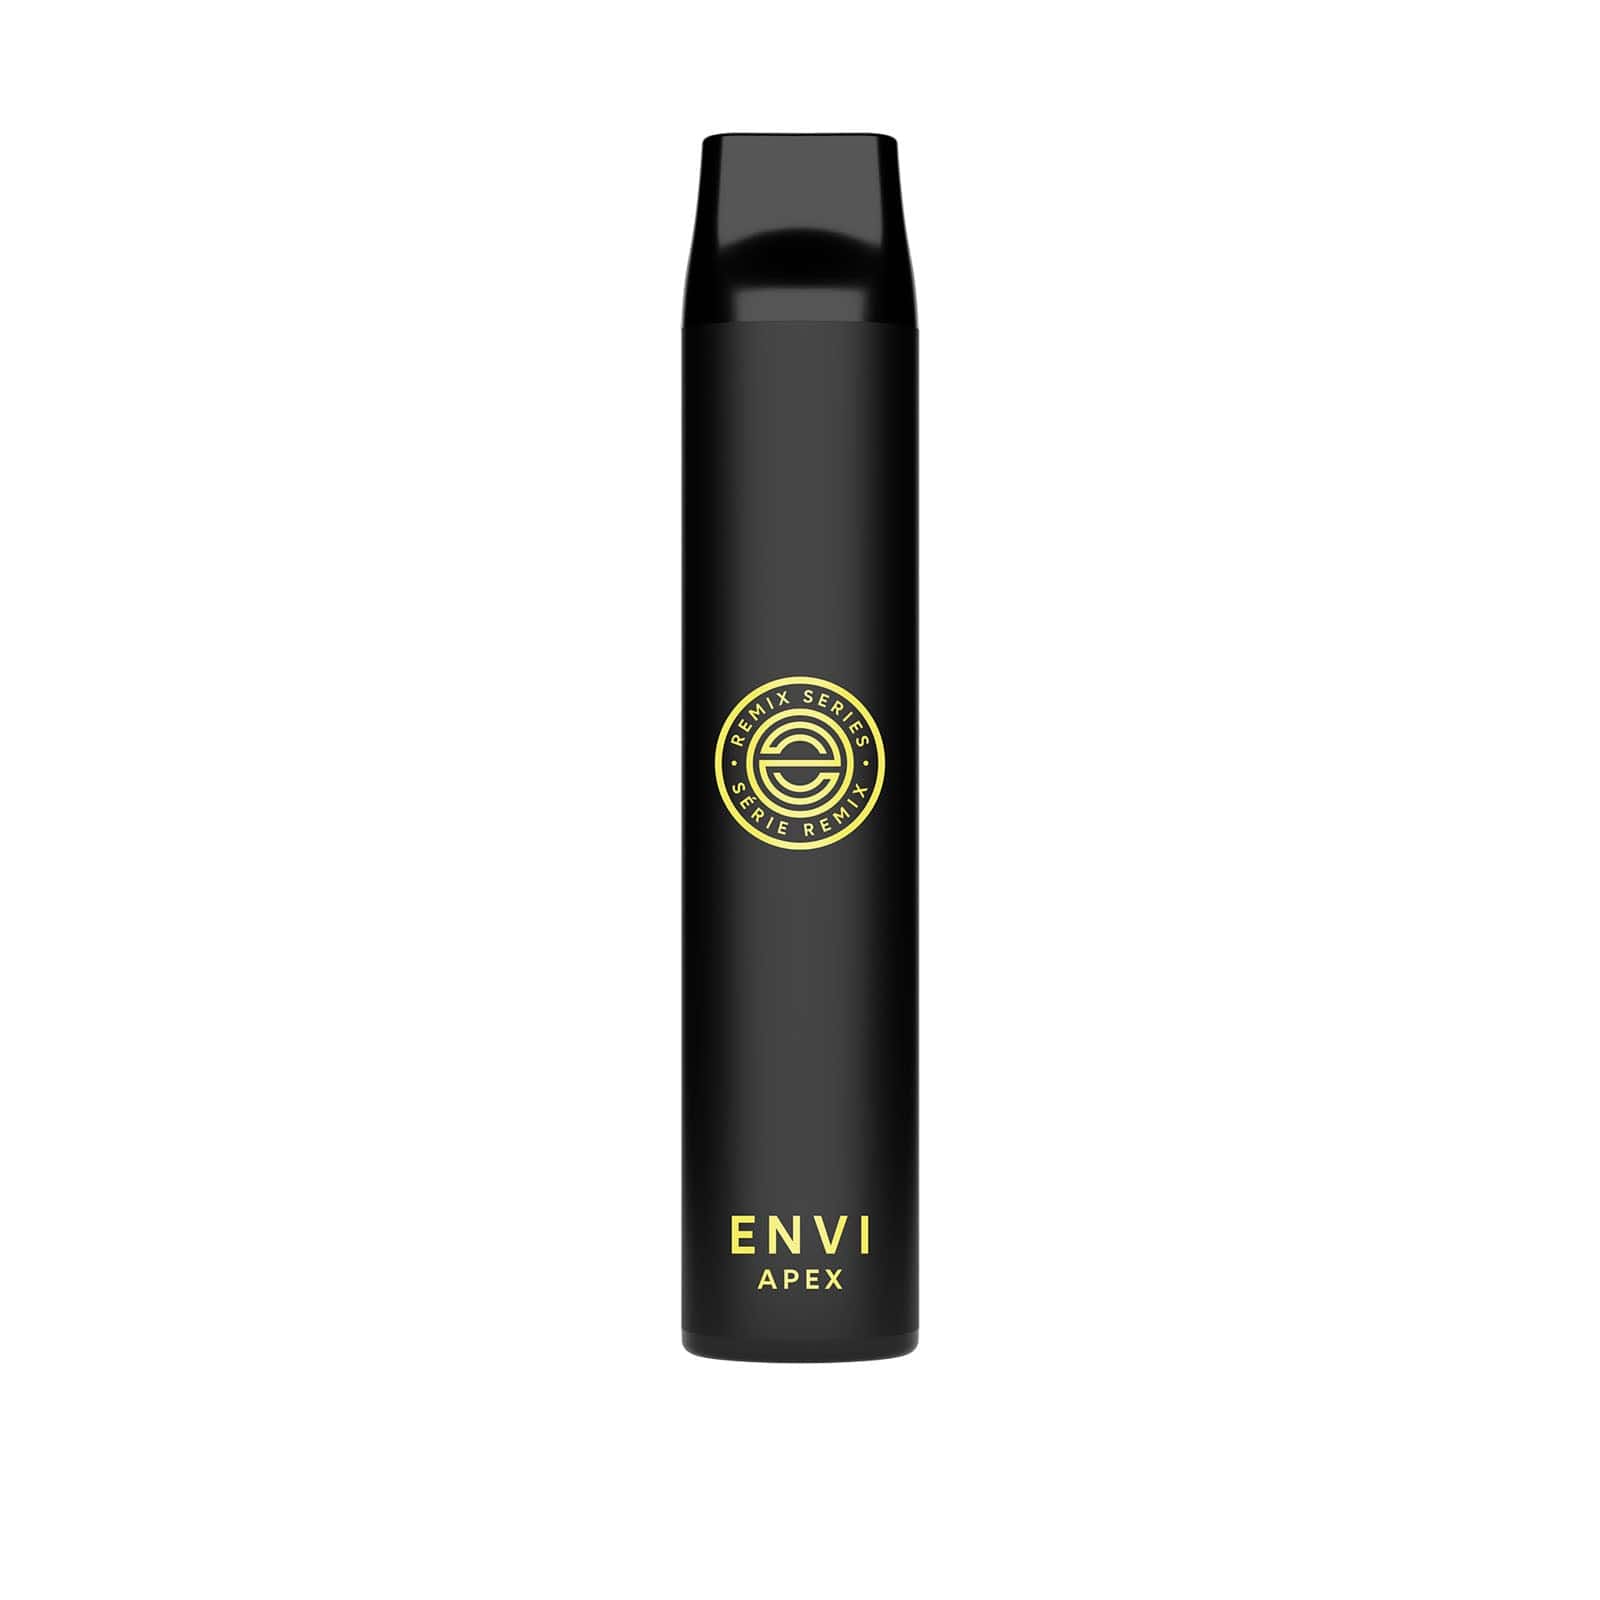 ENVI Apex - Pineapple Coconut Lime Iced available on Canada online vape shop